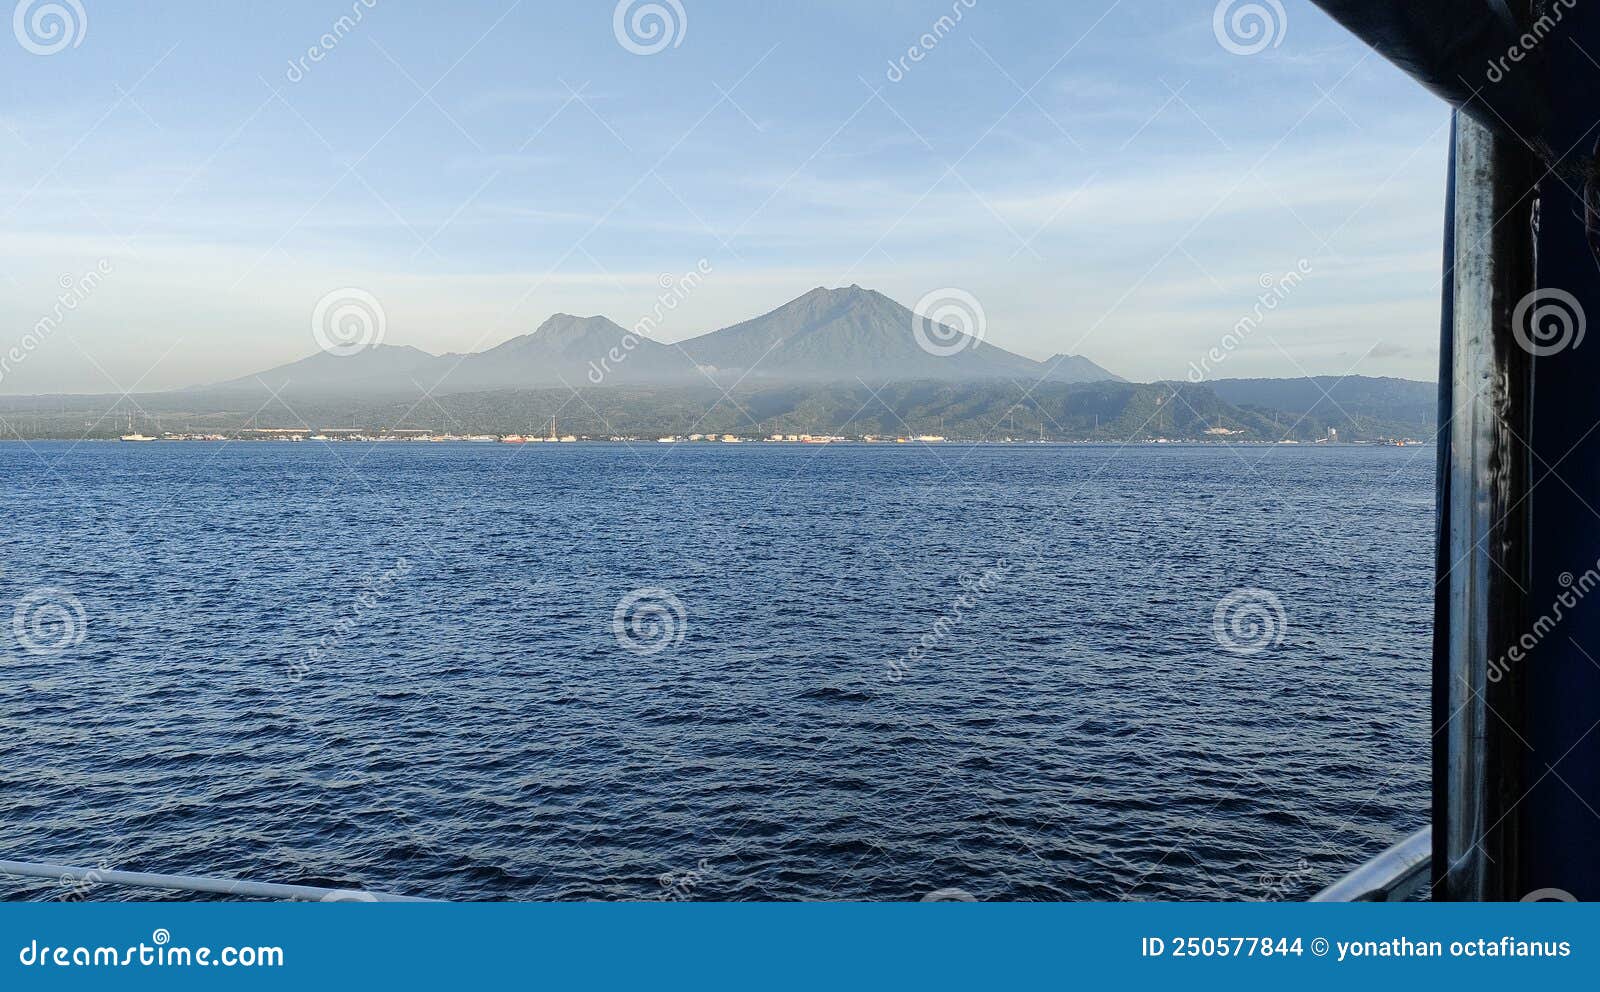 mountain view from the sea happy holliday